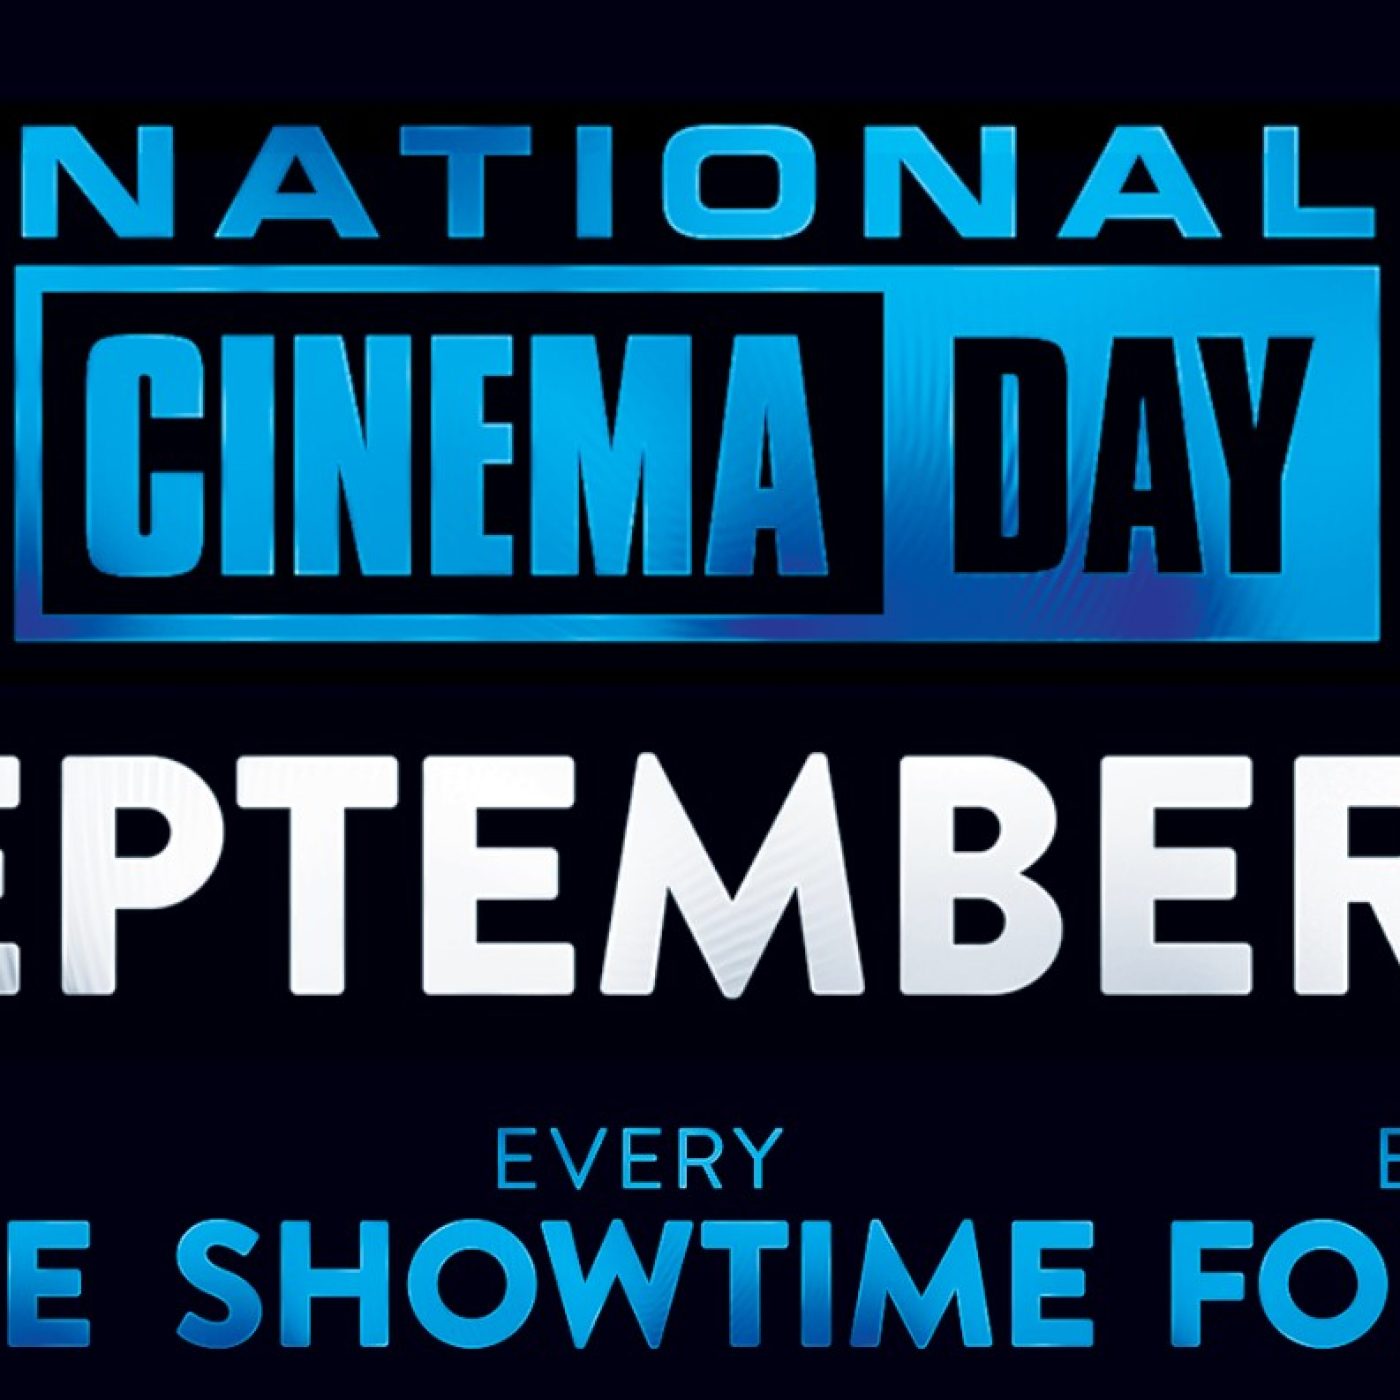 $3 Movies All Day Saturday In Northridge For National Cinema Day